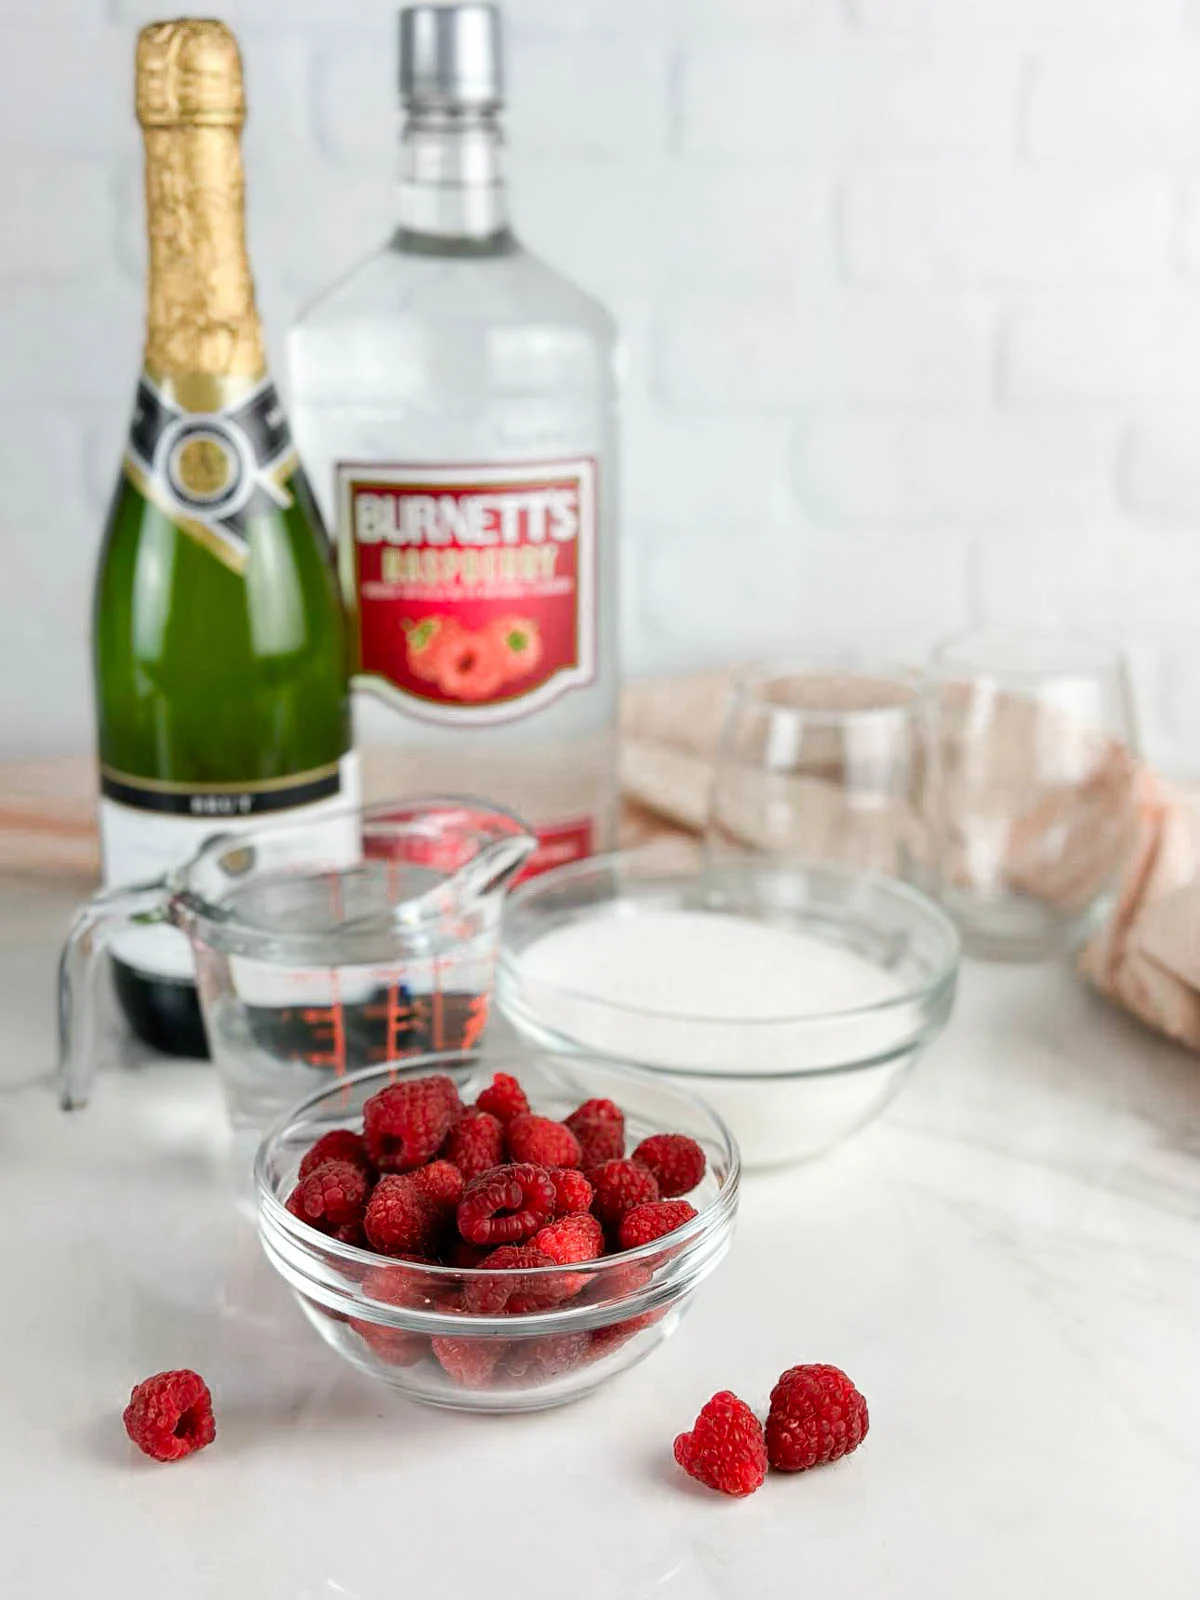 Ingredients for raspberry champagne cocktails: raspberries, sugar, water, raspberry liqueur, and sparkling white wine